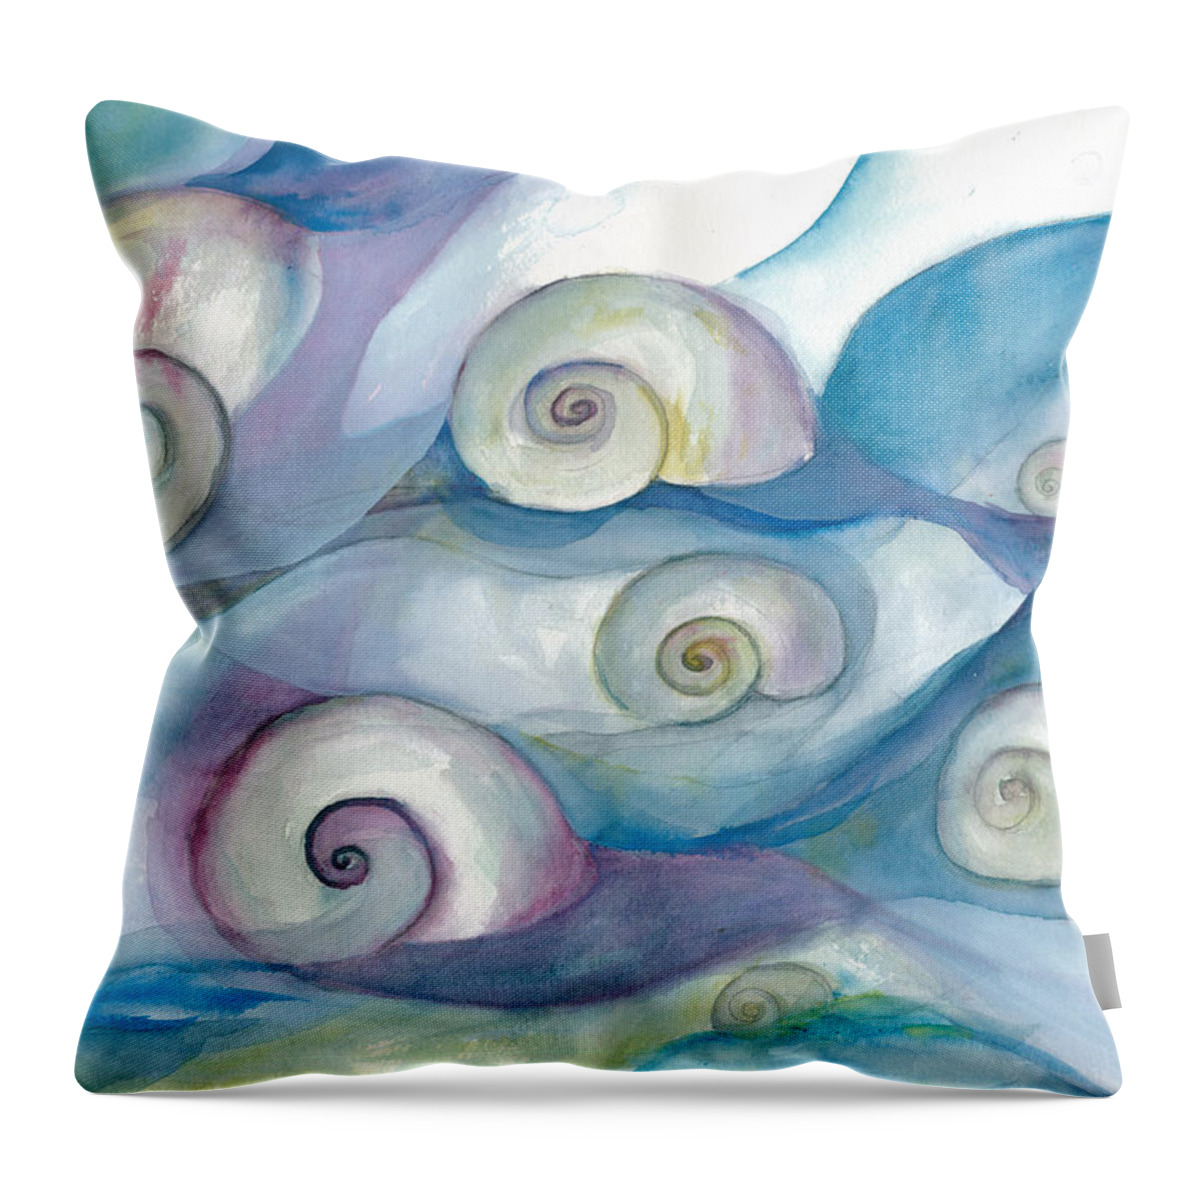 Nautilus Throw Pillow featuring the painting Nautilus Abstract by Kelly Perez